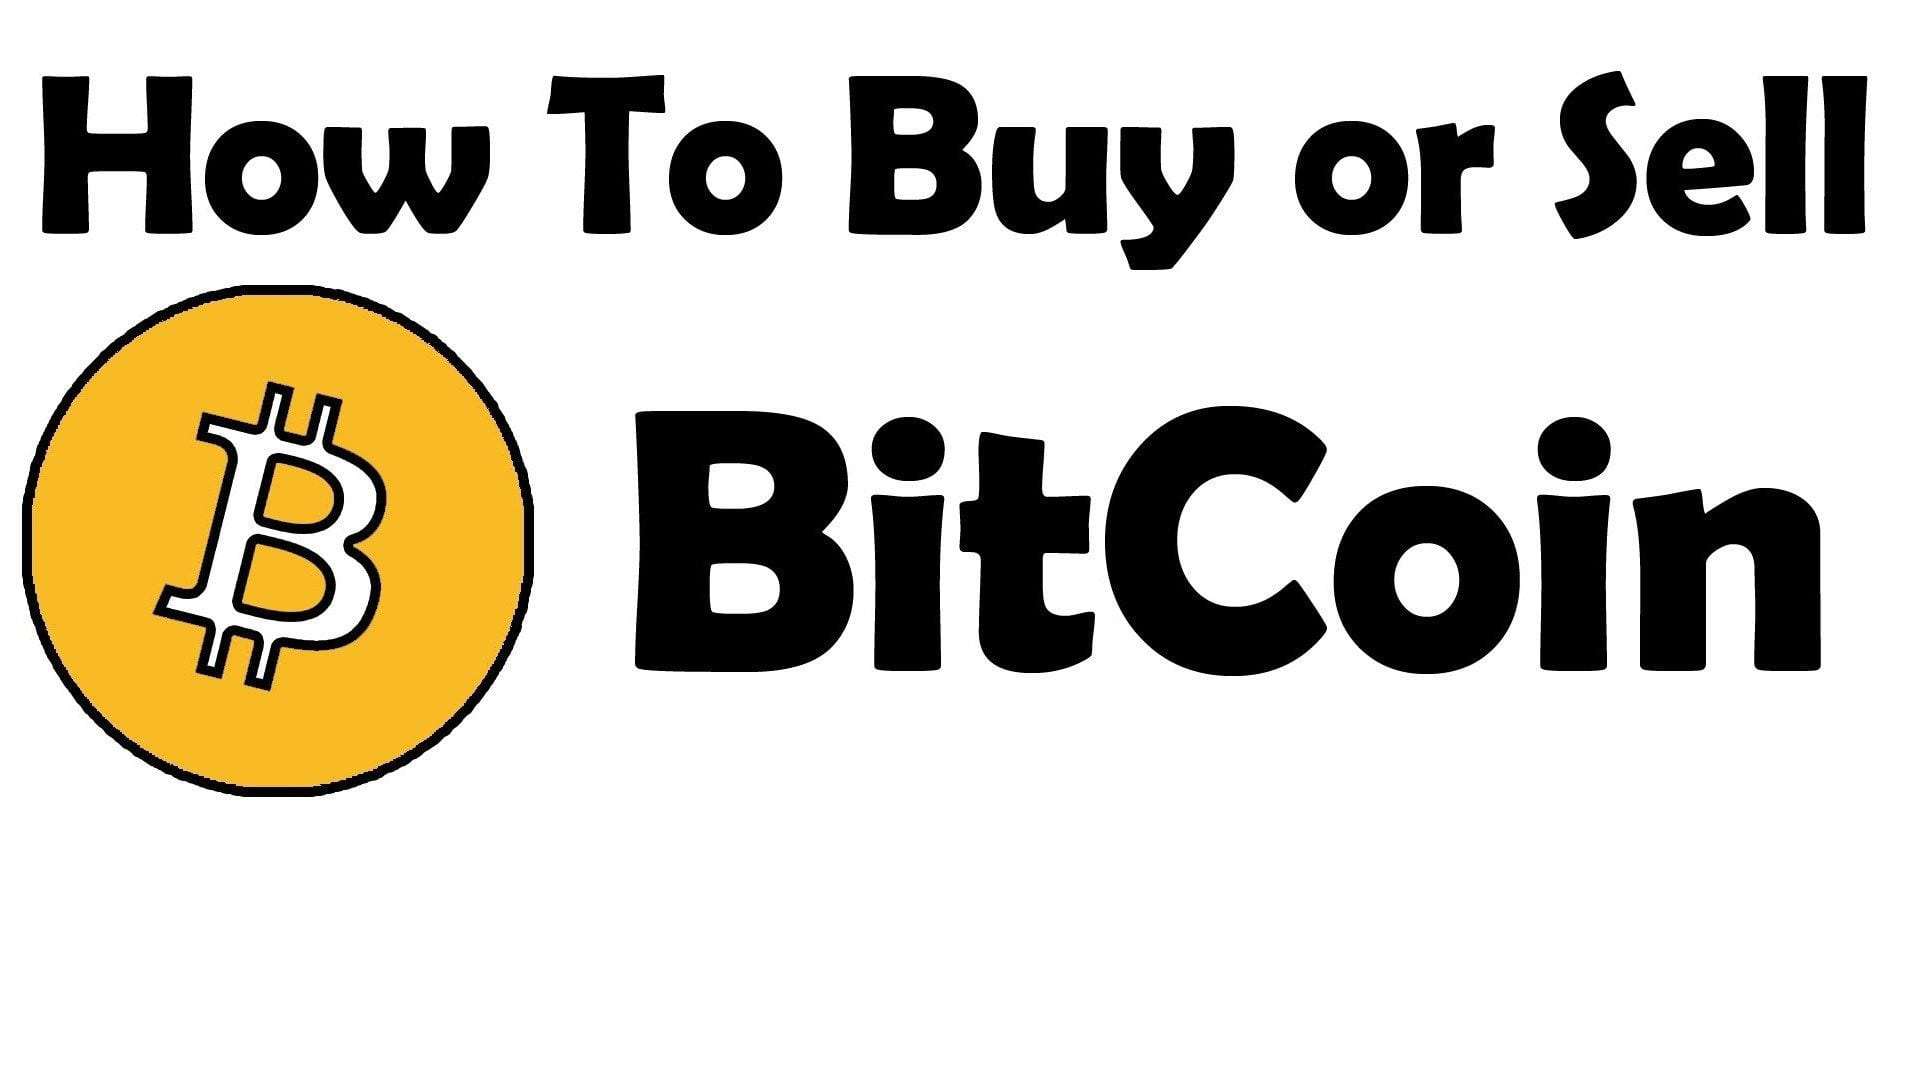 how much can i buy with 1044604 in bitcoins